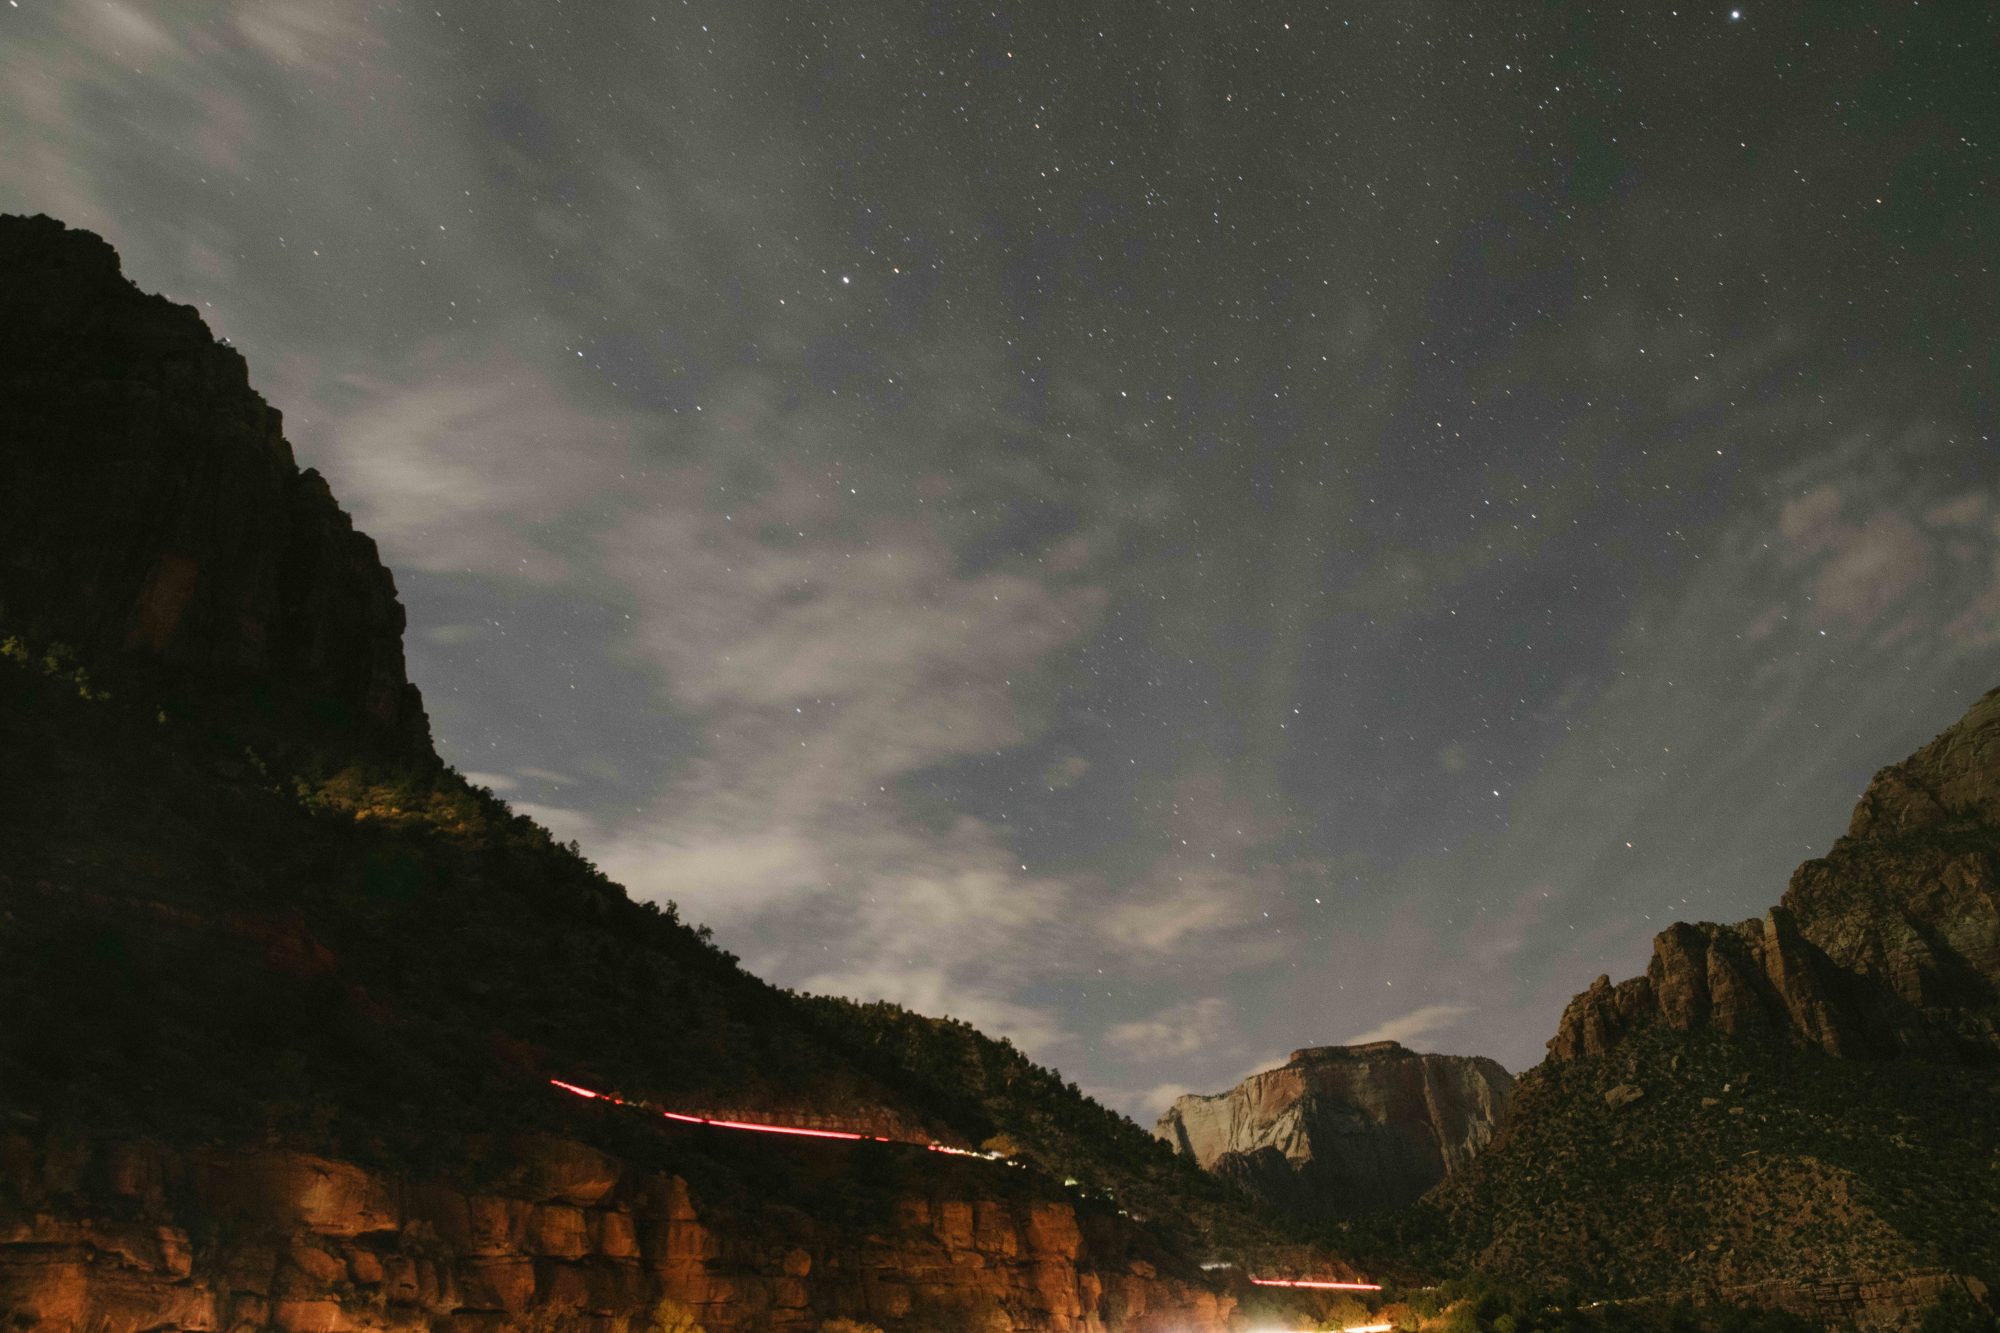 Night photograph of stars and clouds above Zion National Park with light trails from cars driving down the mountain road